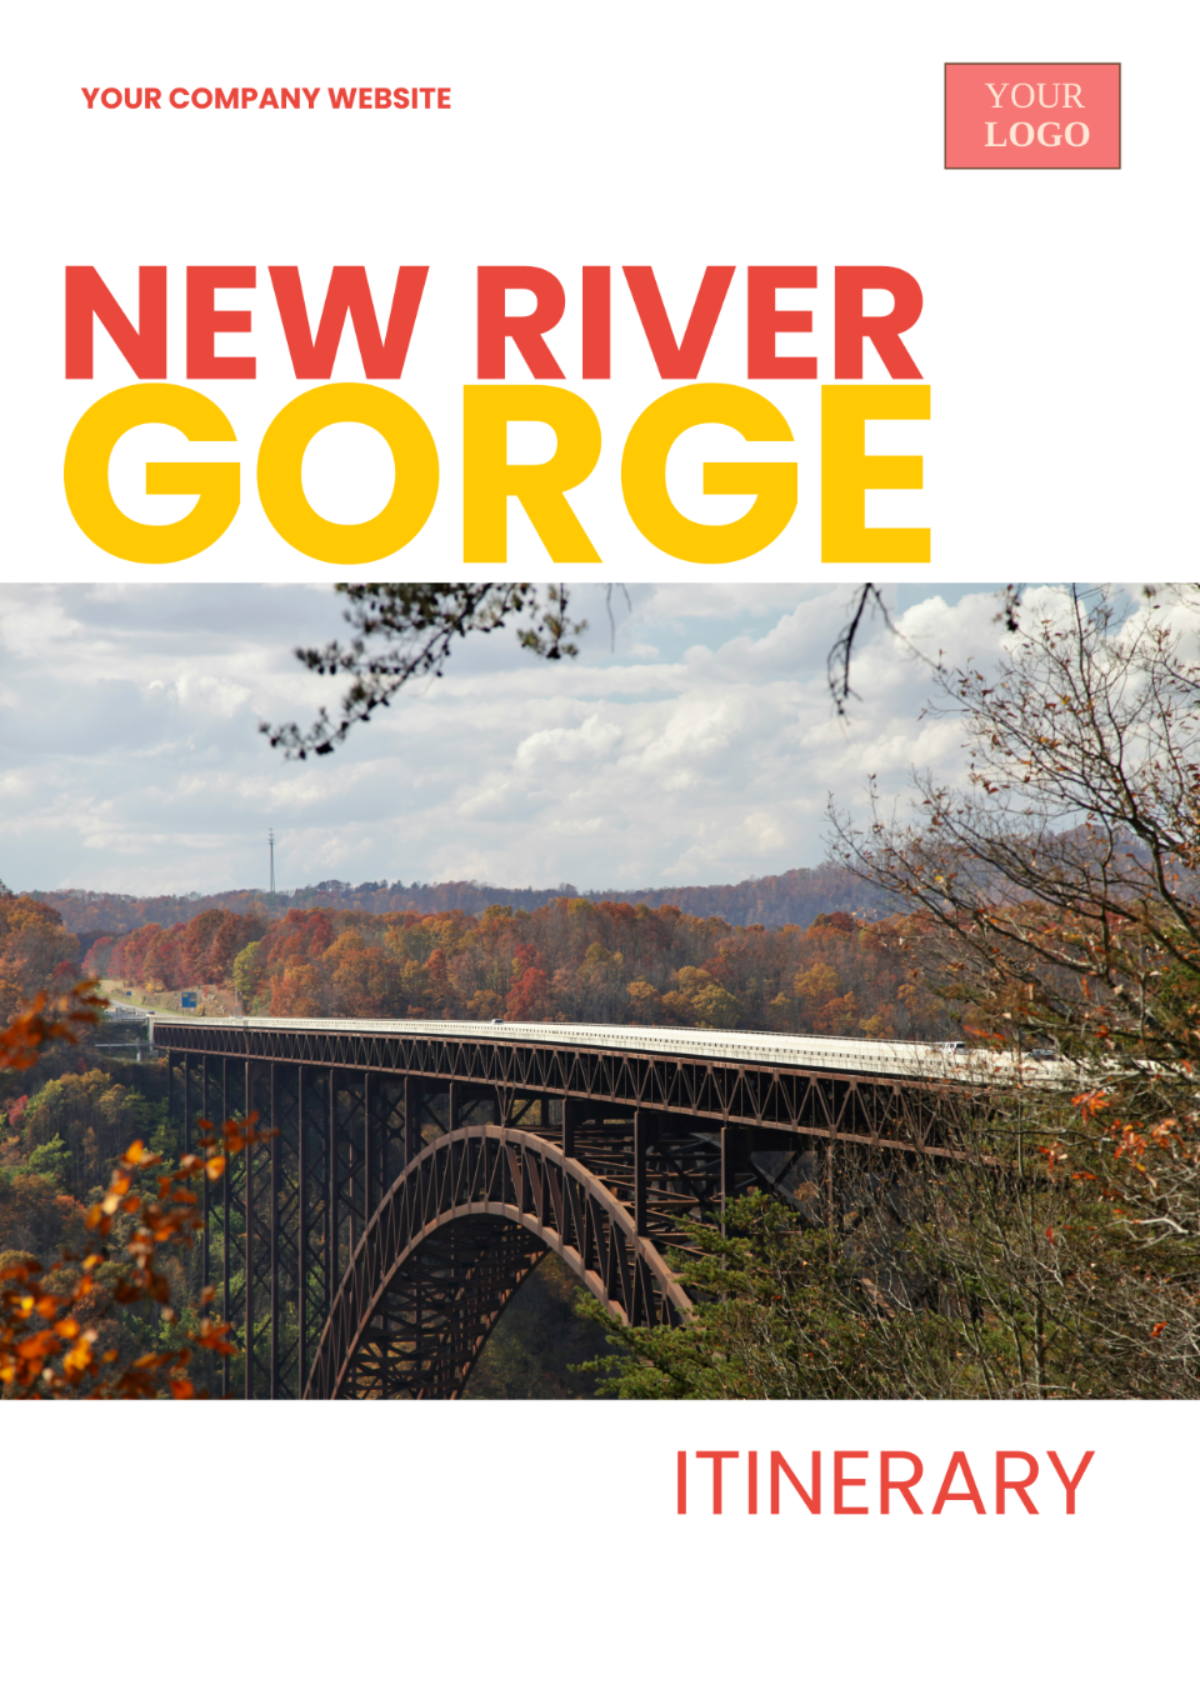 New River Gorge Itinerary Template